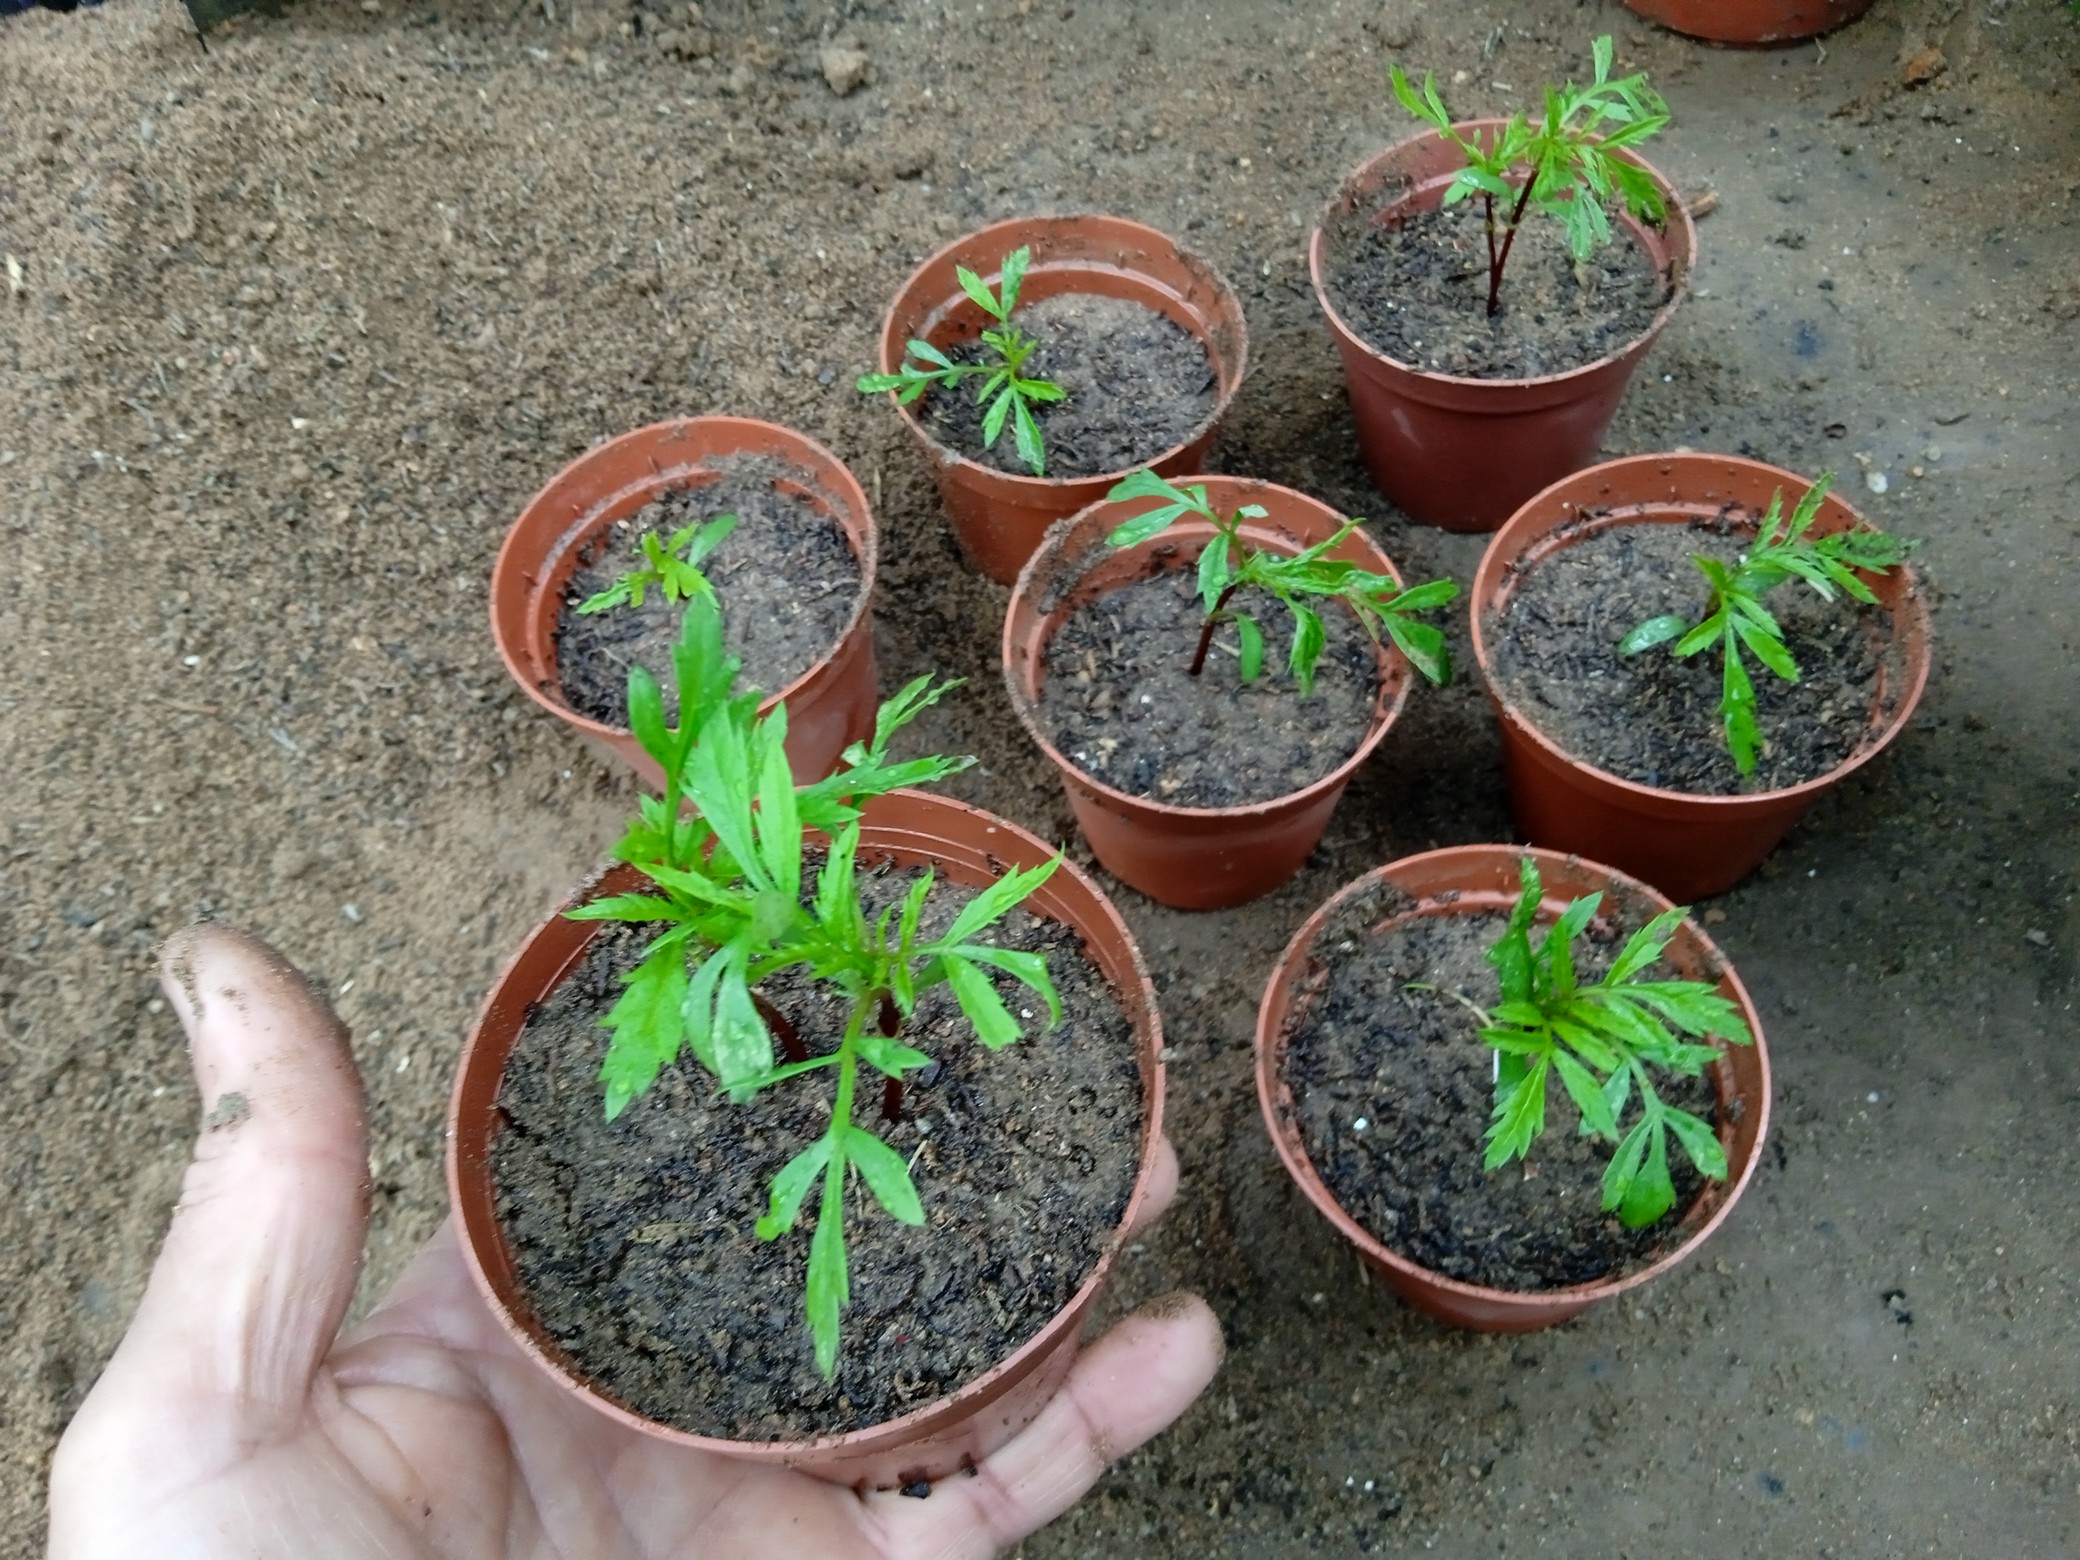 Growing marigolds from seeds is easy, and transplanting seedlings indoors is not particularly difficult. To get the longest growing season from your marigolds, start the seeds indoors